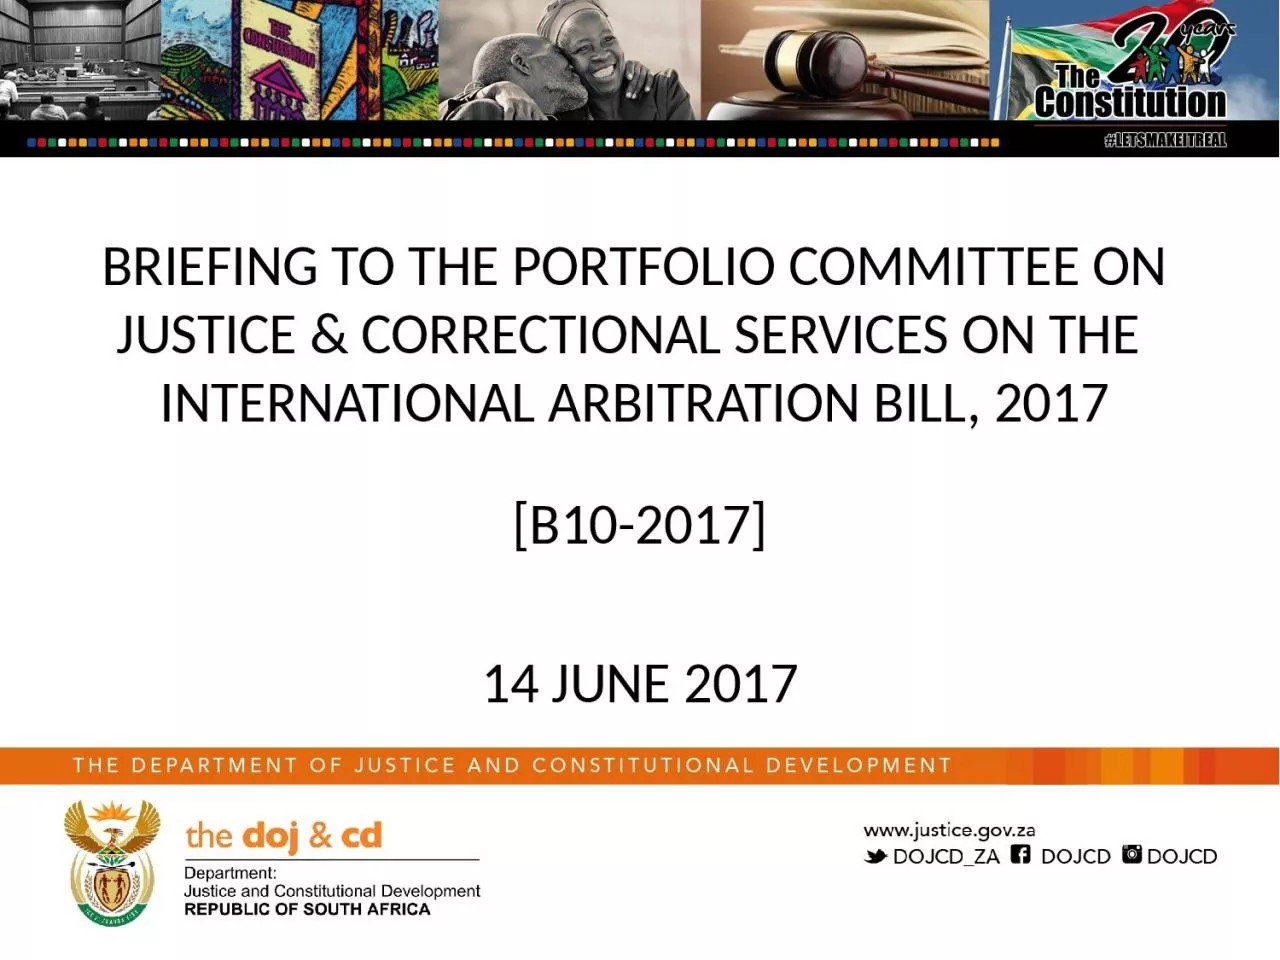 BRIEFING  TO THE PORTFOLIO COMMITTEE ON JUSTICE & CORRECTIONAL SERVICES ON THE  INTERNATIONAL